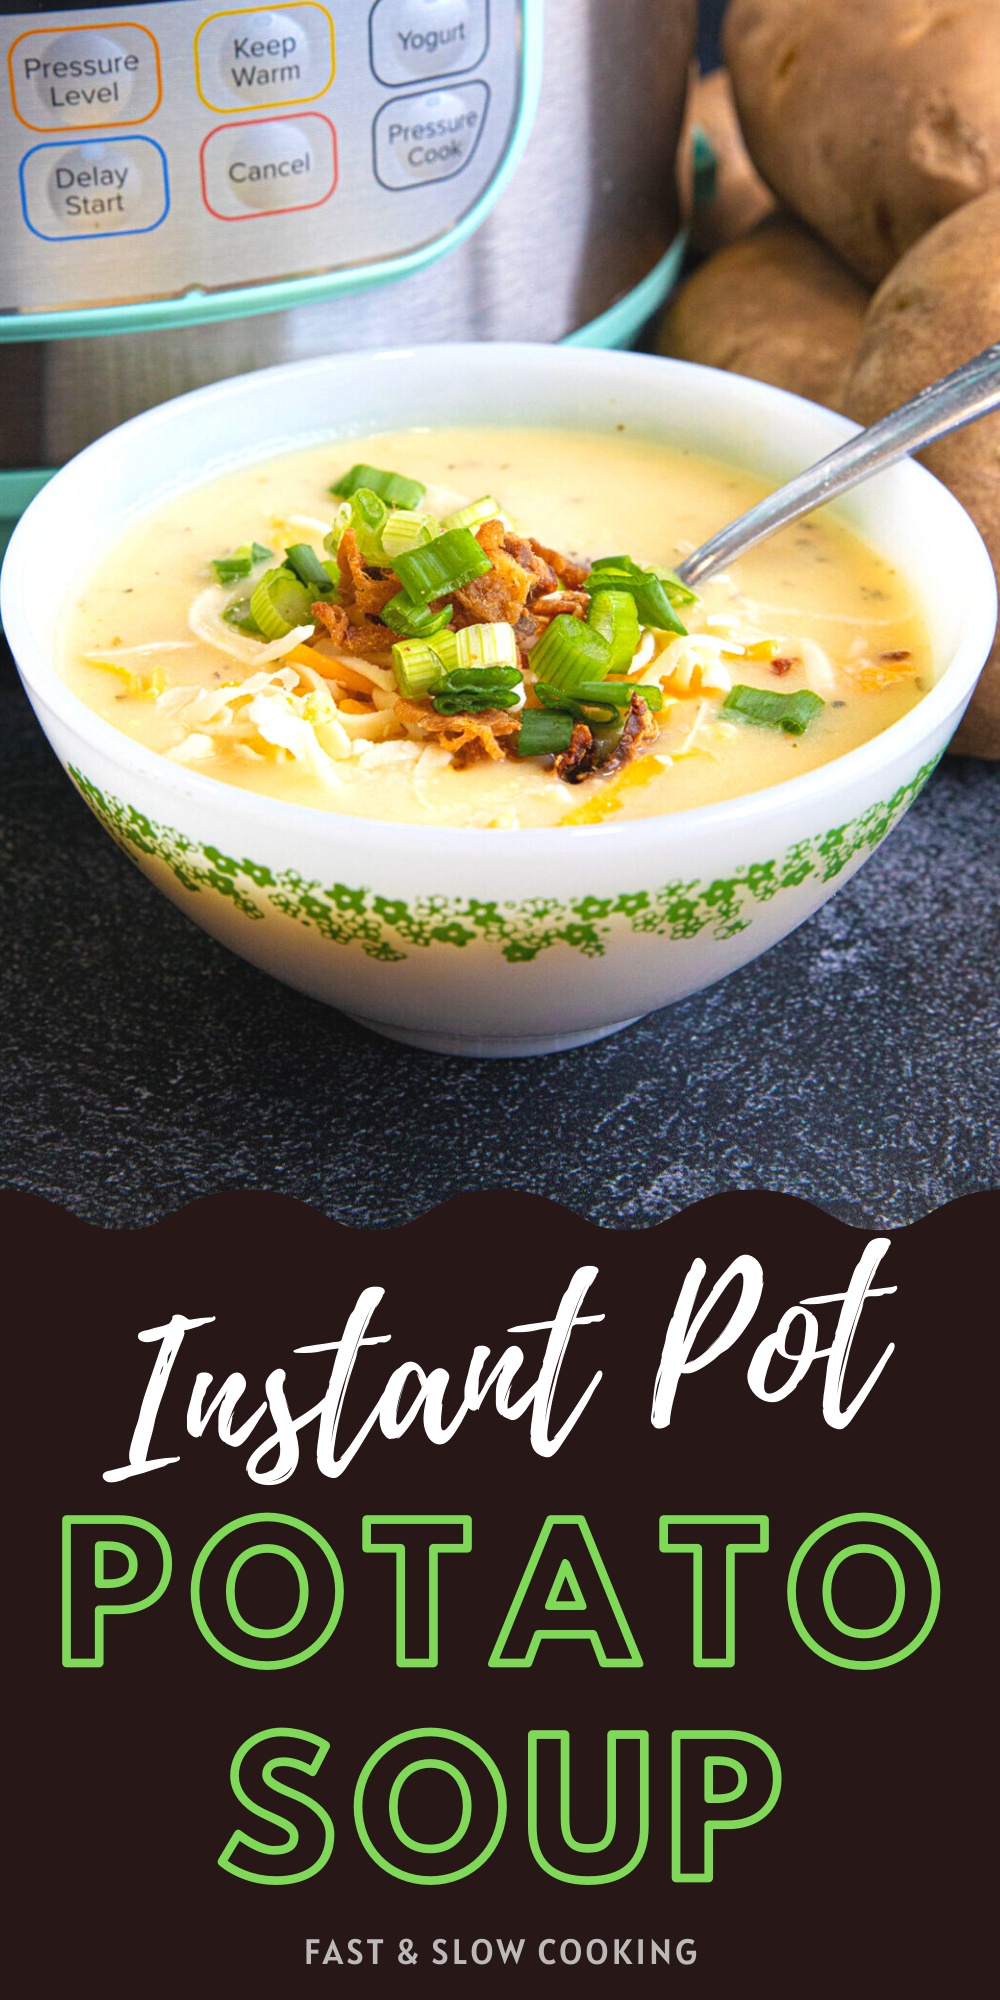 eed a rich, hearty soup that you can make in a flash? This Instant Pot Potato Soup is a family favourite that we've been making for many years.